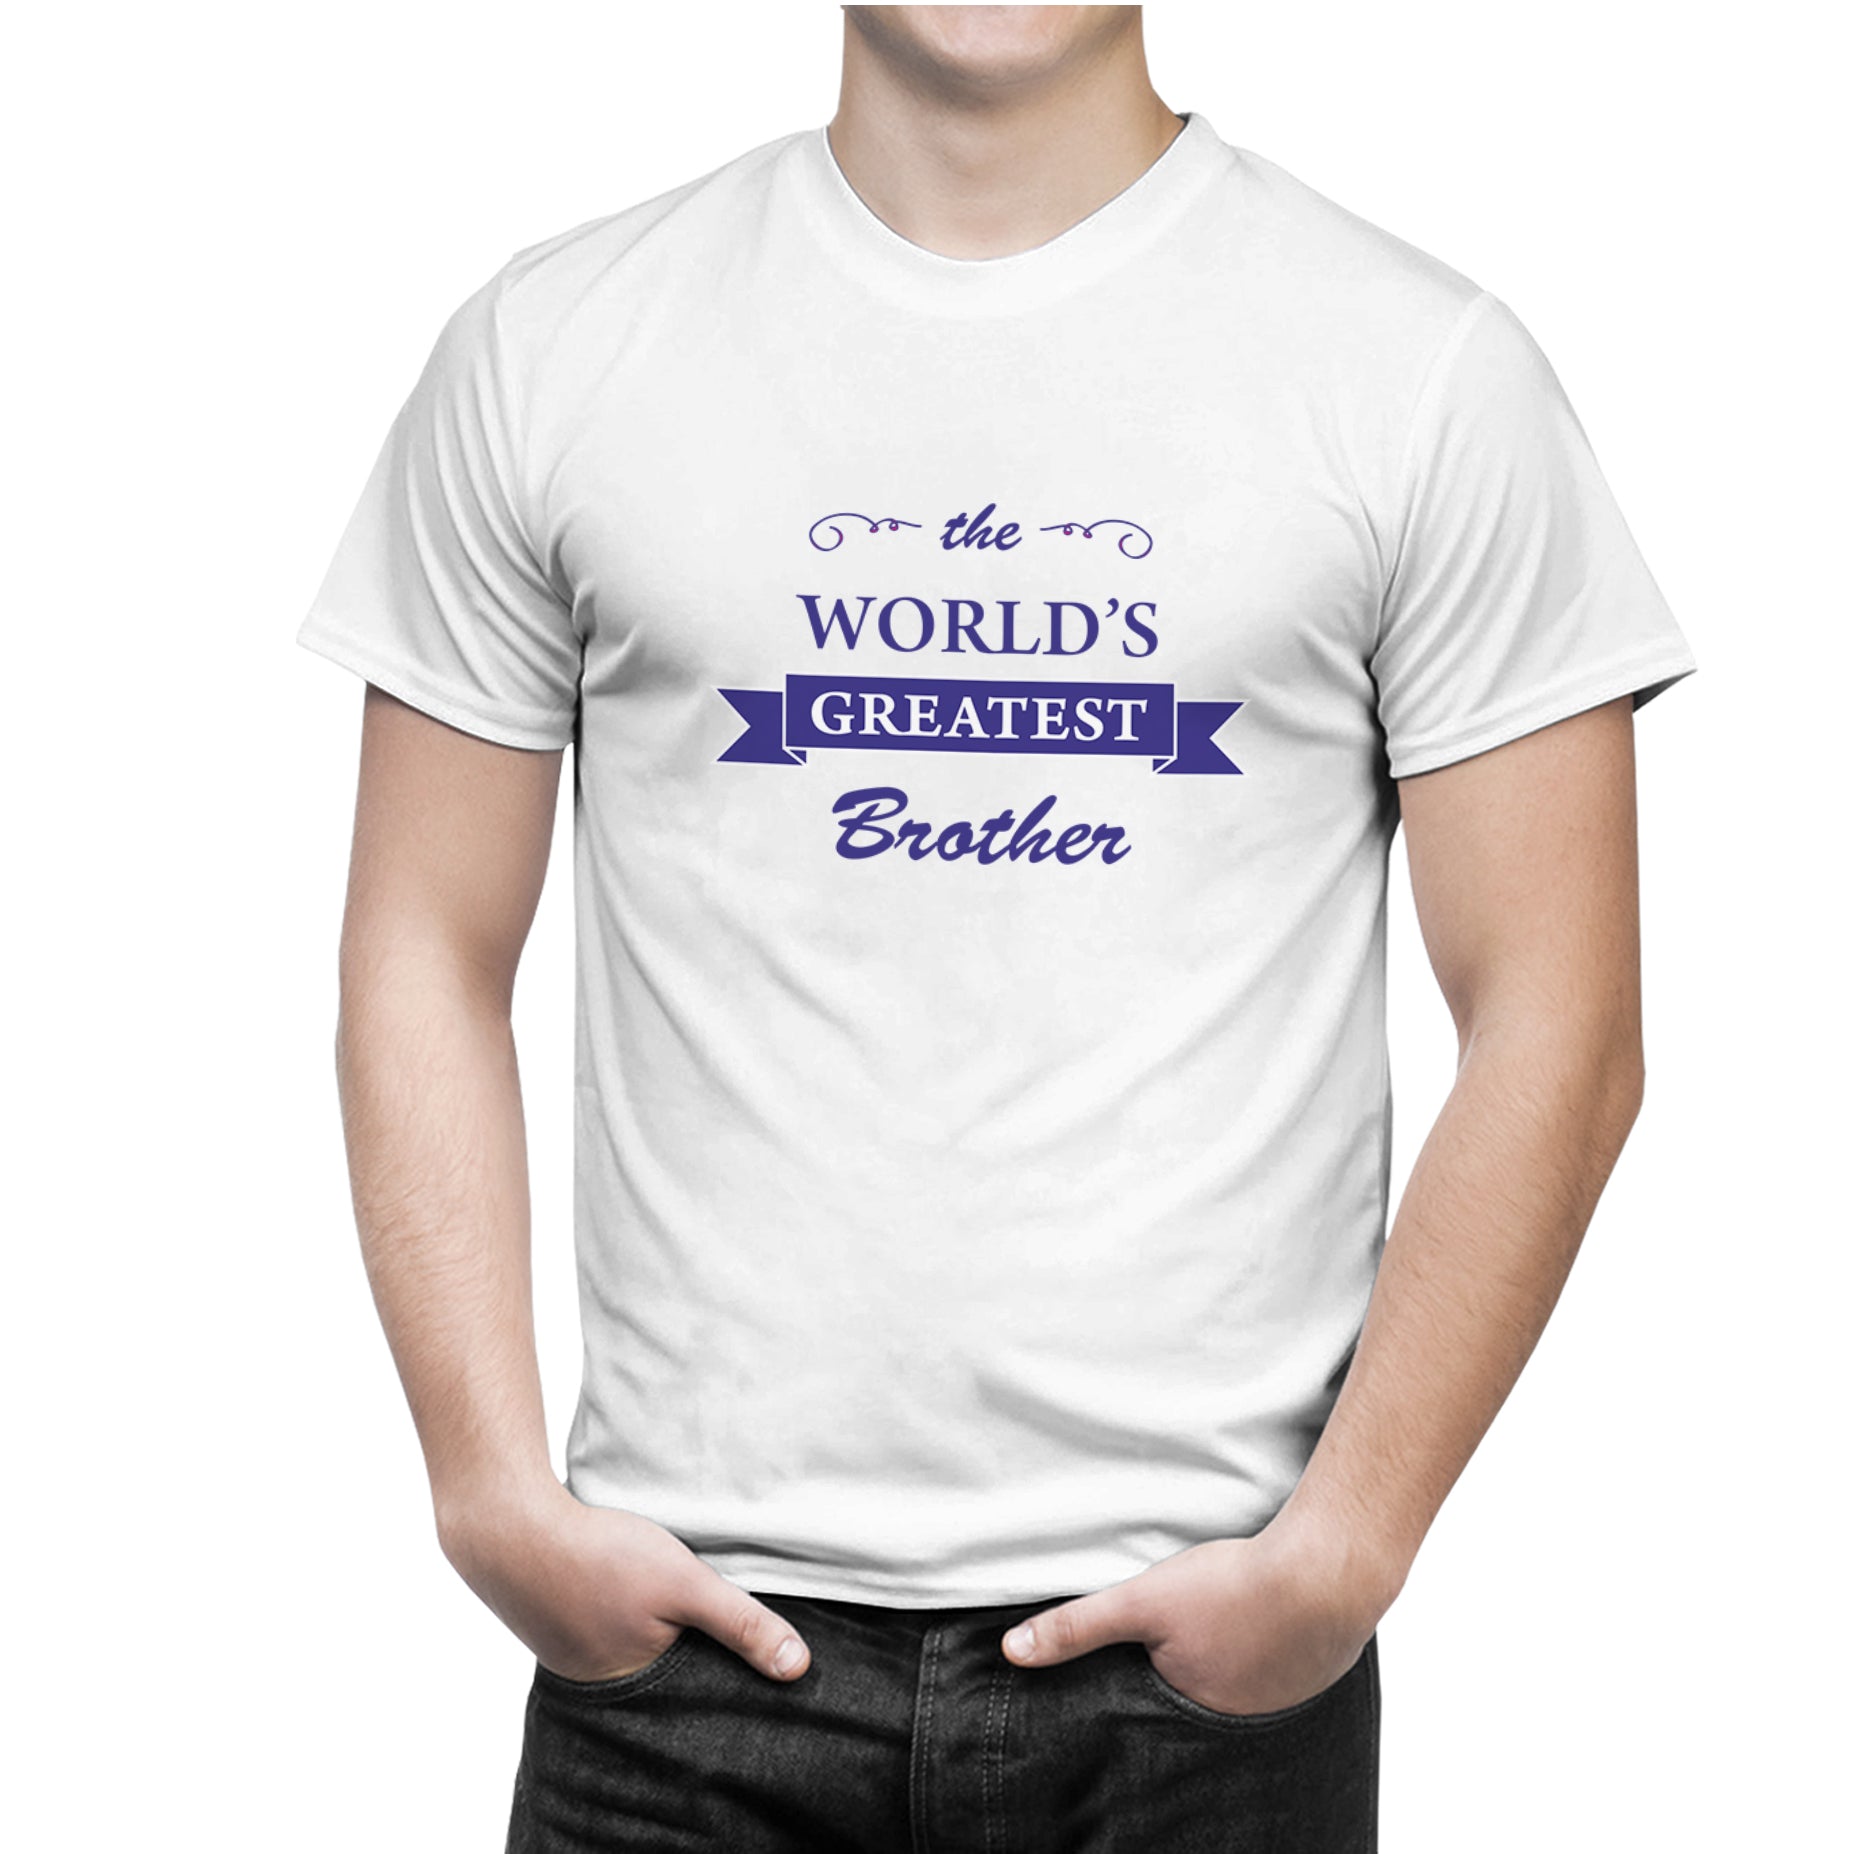 world's greatest brother-world's greatest sister matching Sibling t shirts - white